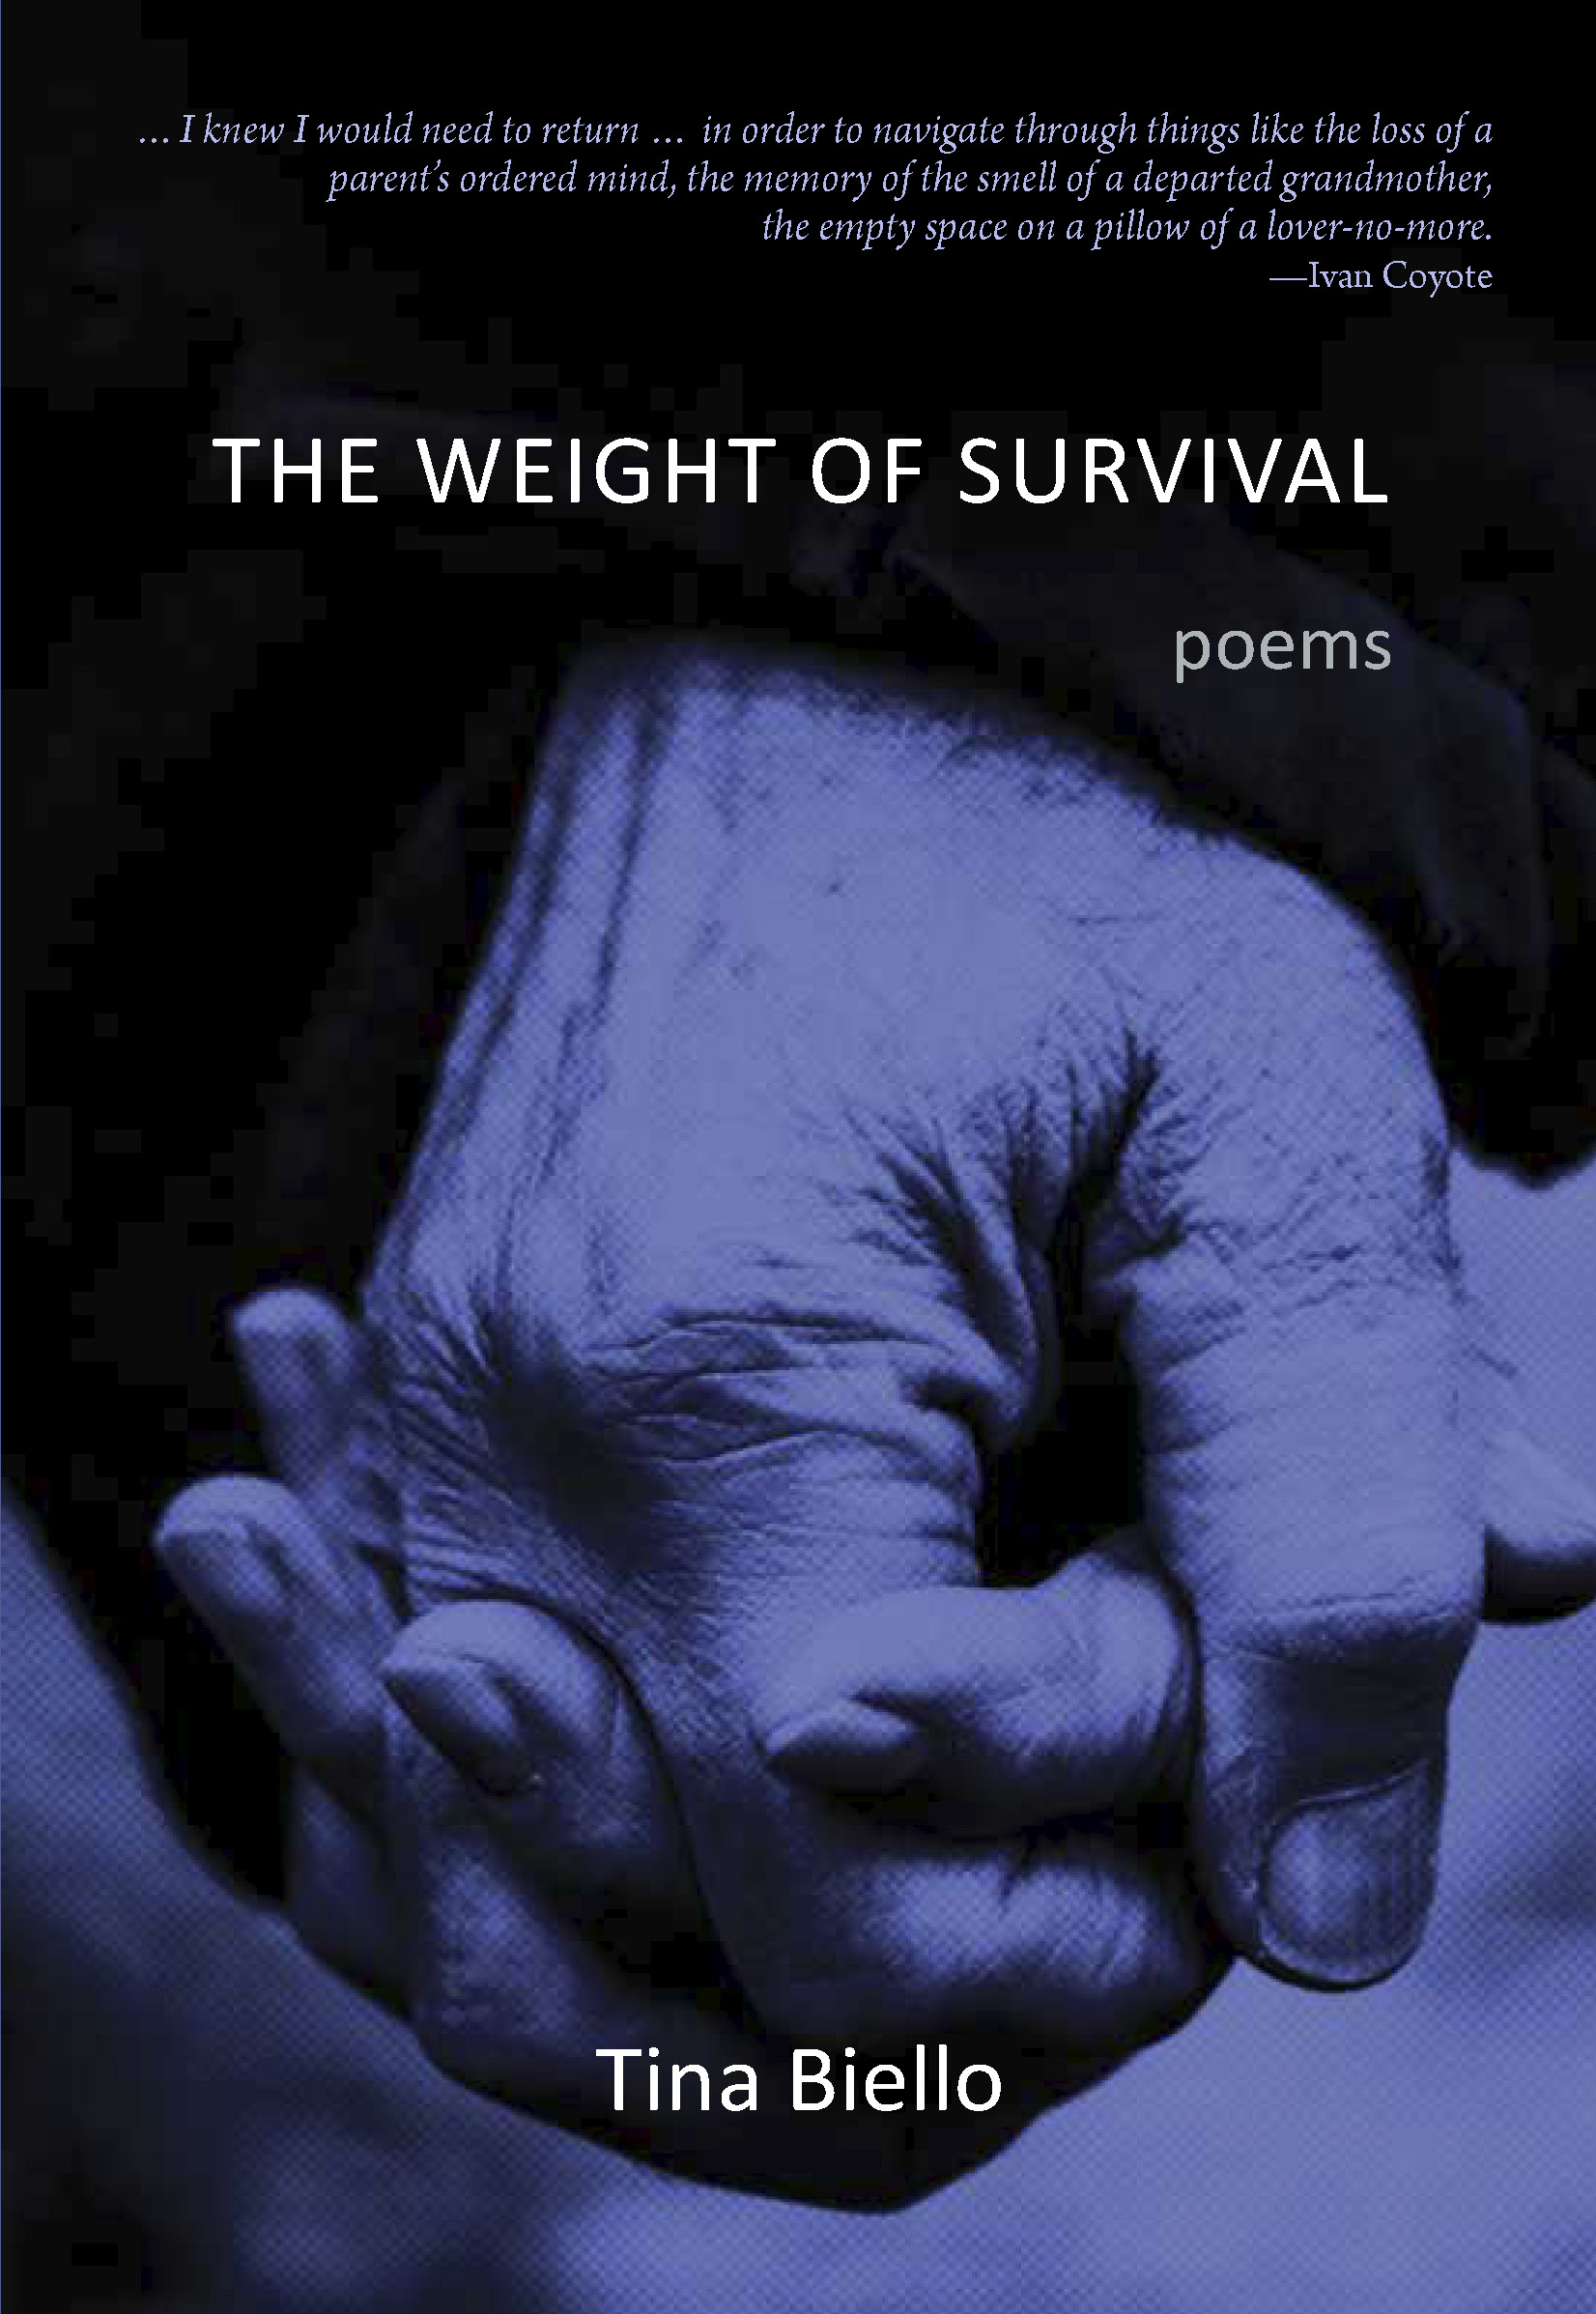 Book cover of "The Weight of Survival"